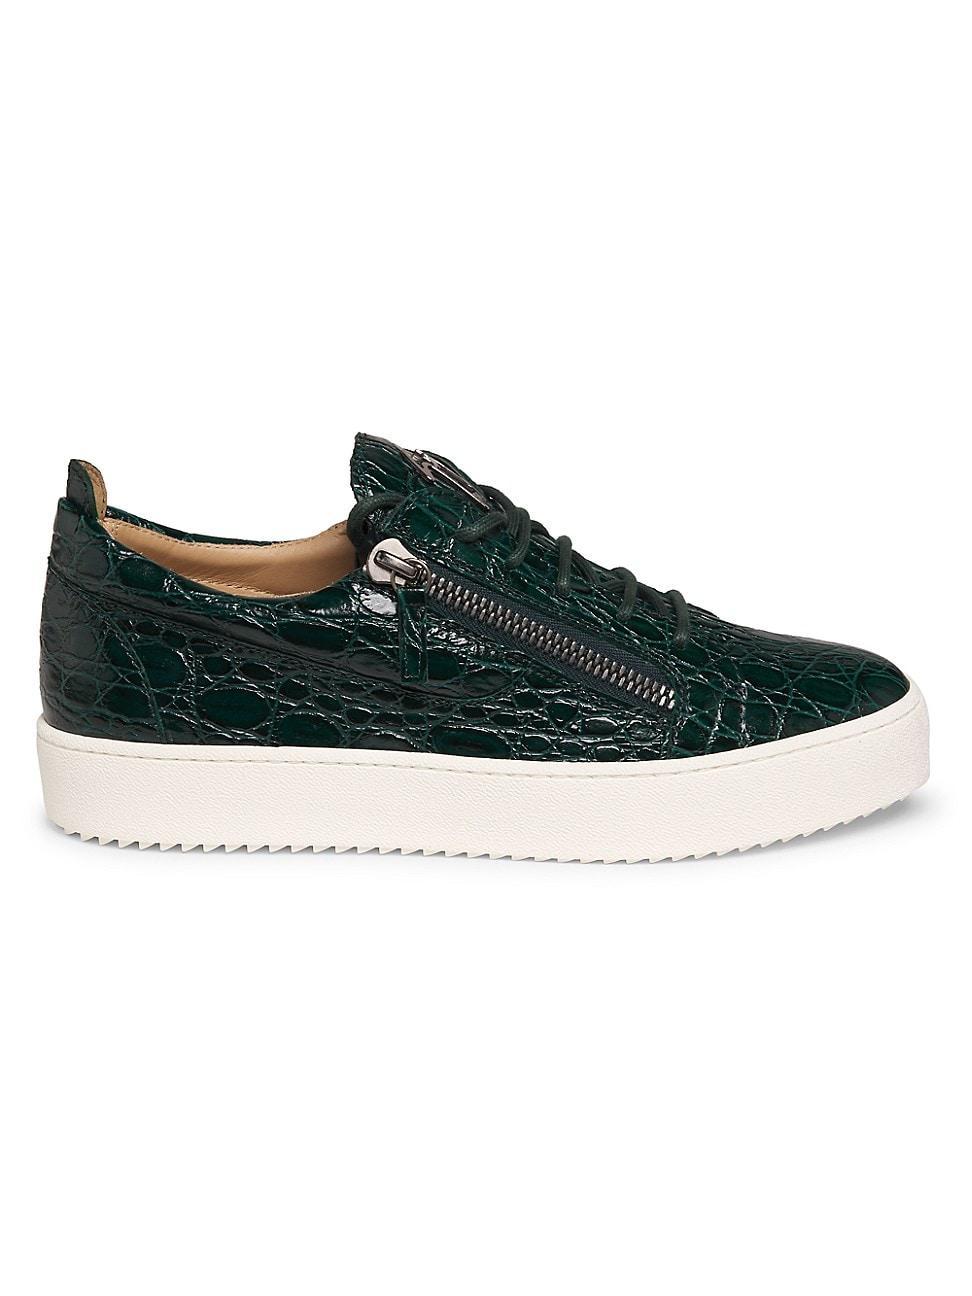 Mens Embossed-Leather Sneakers Product Image